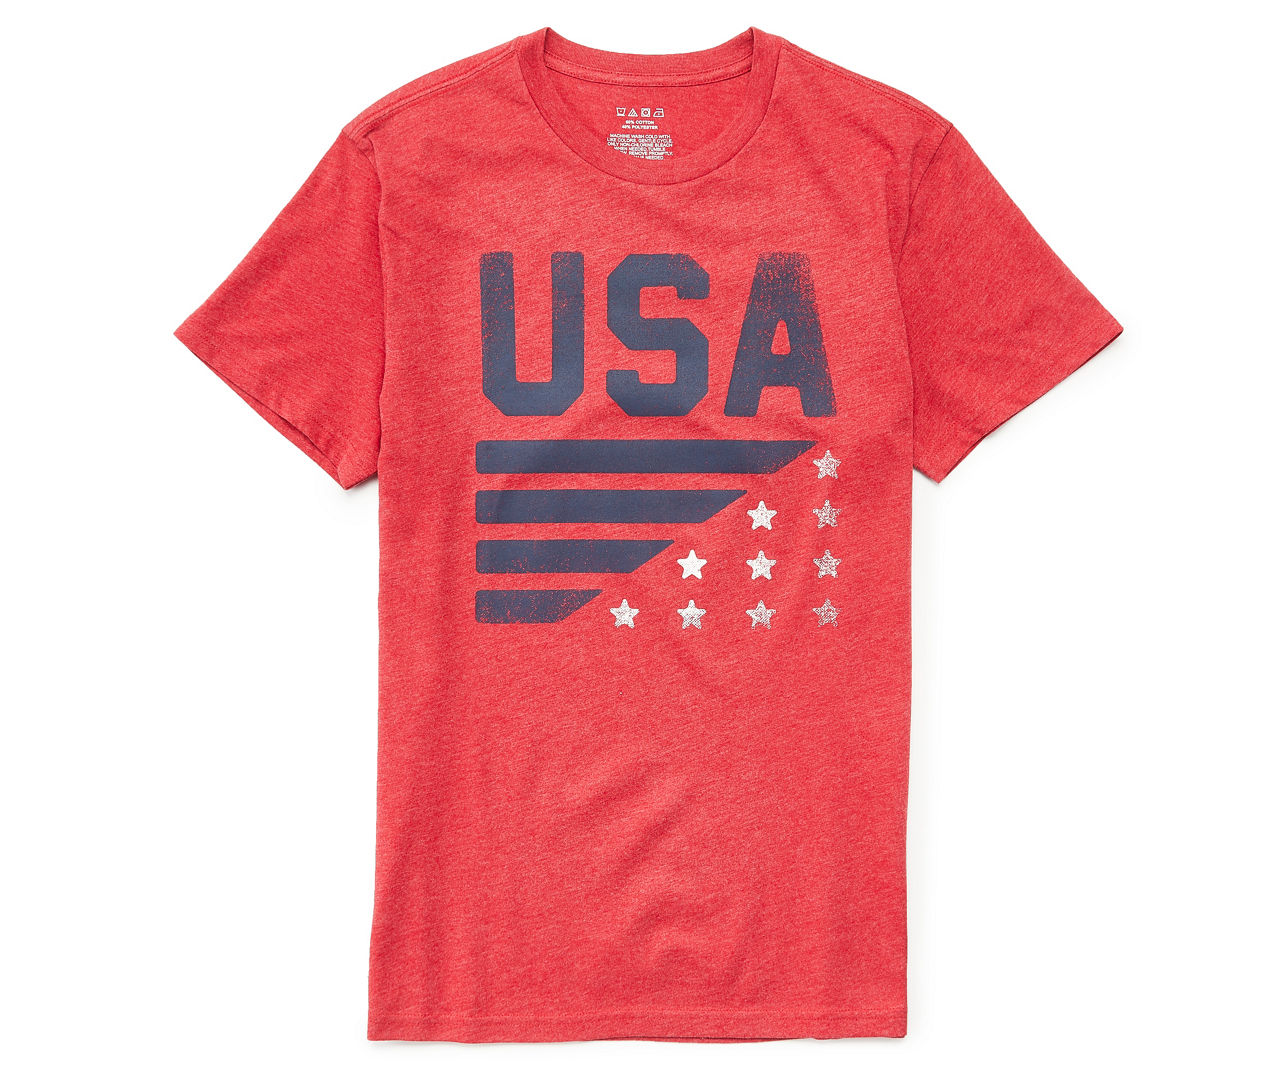 Men's "USA" Red Graphic Tee